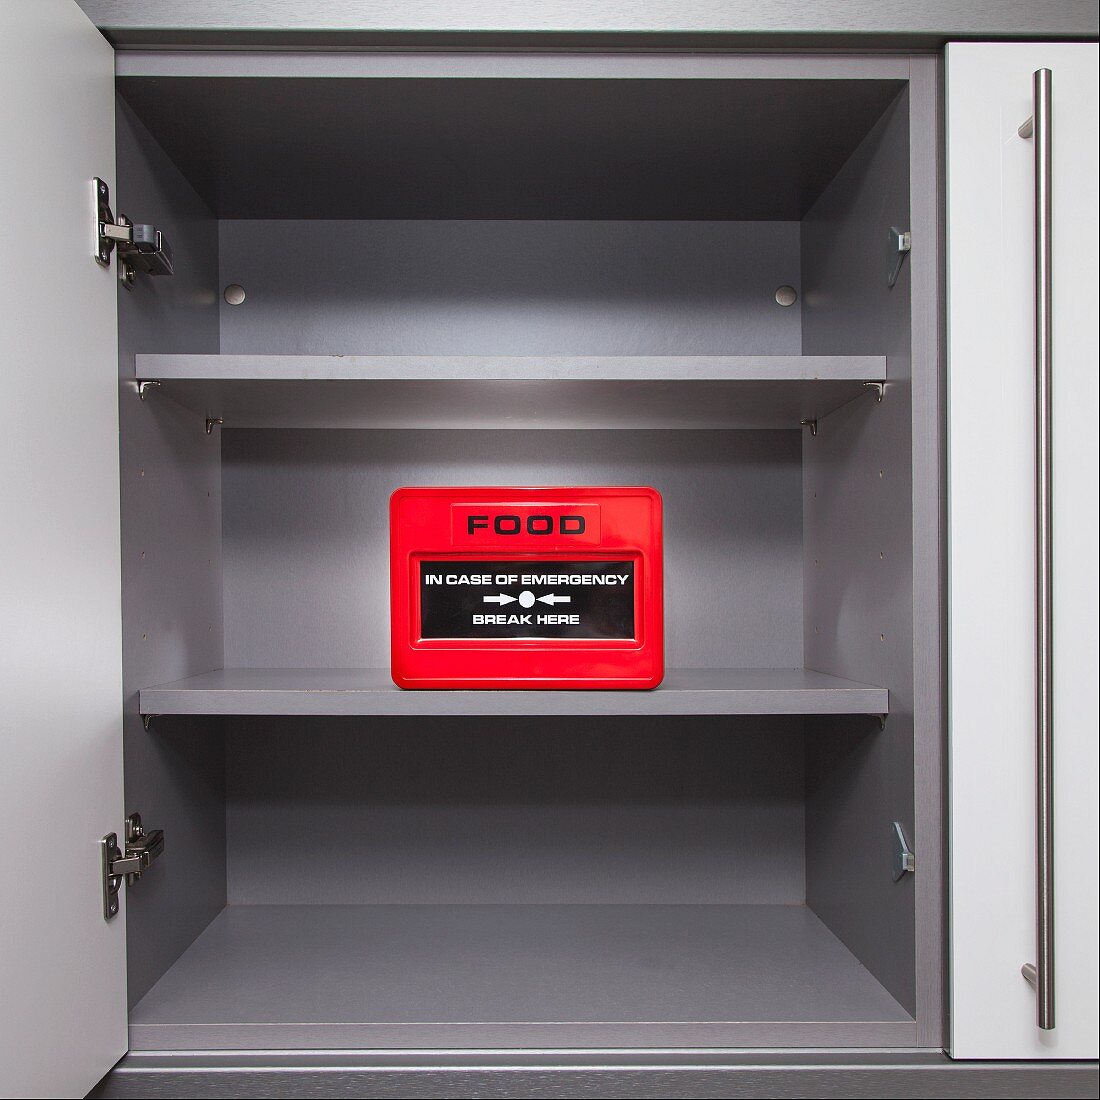 A metal container with emergency food store in an empty kitchen cupboard